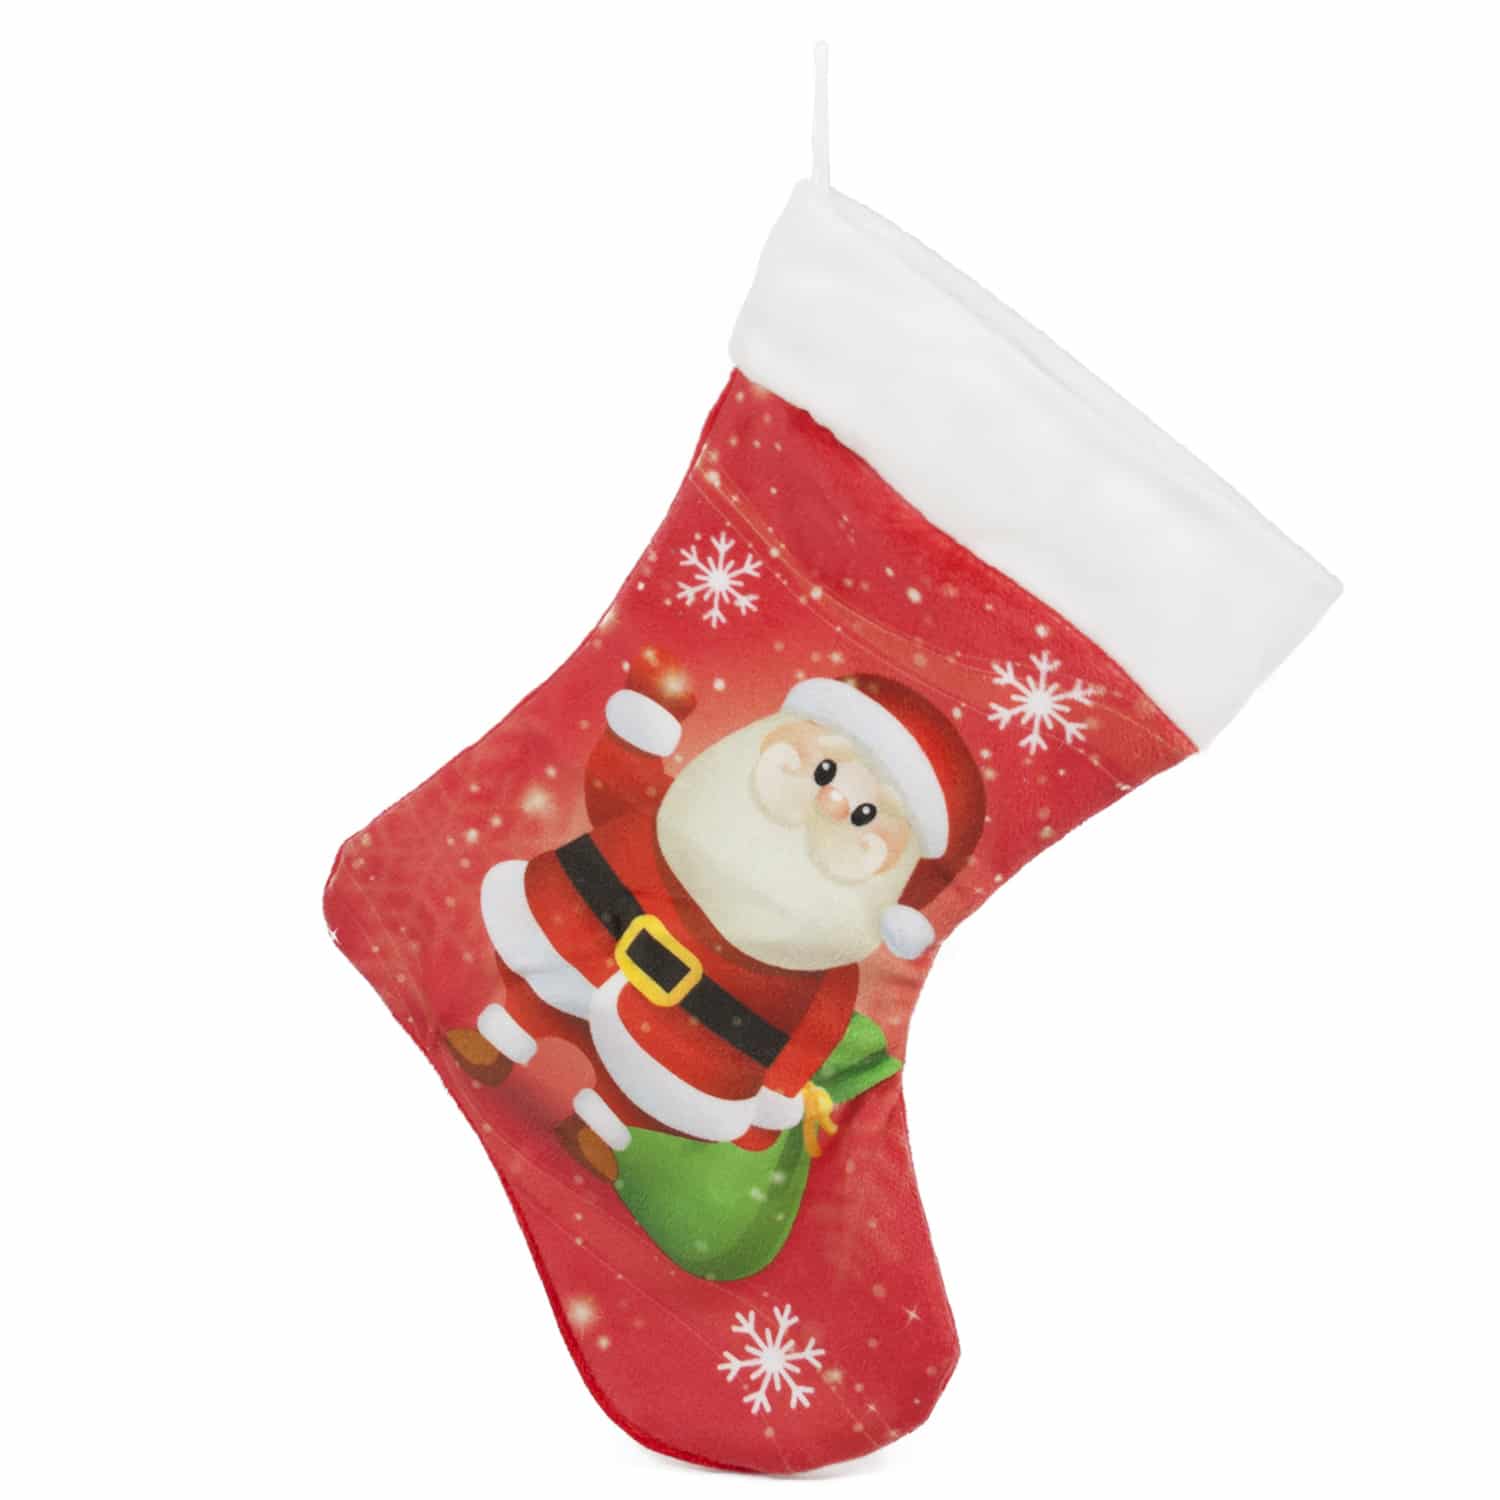 Christmas sock - Red with Santa Claus